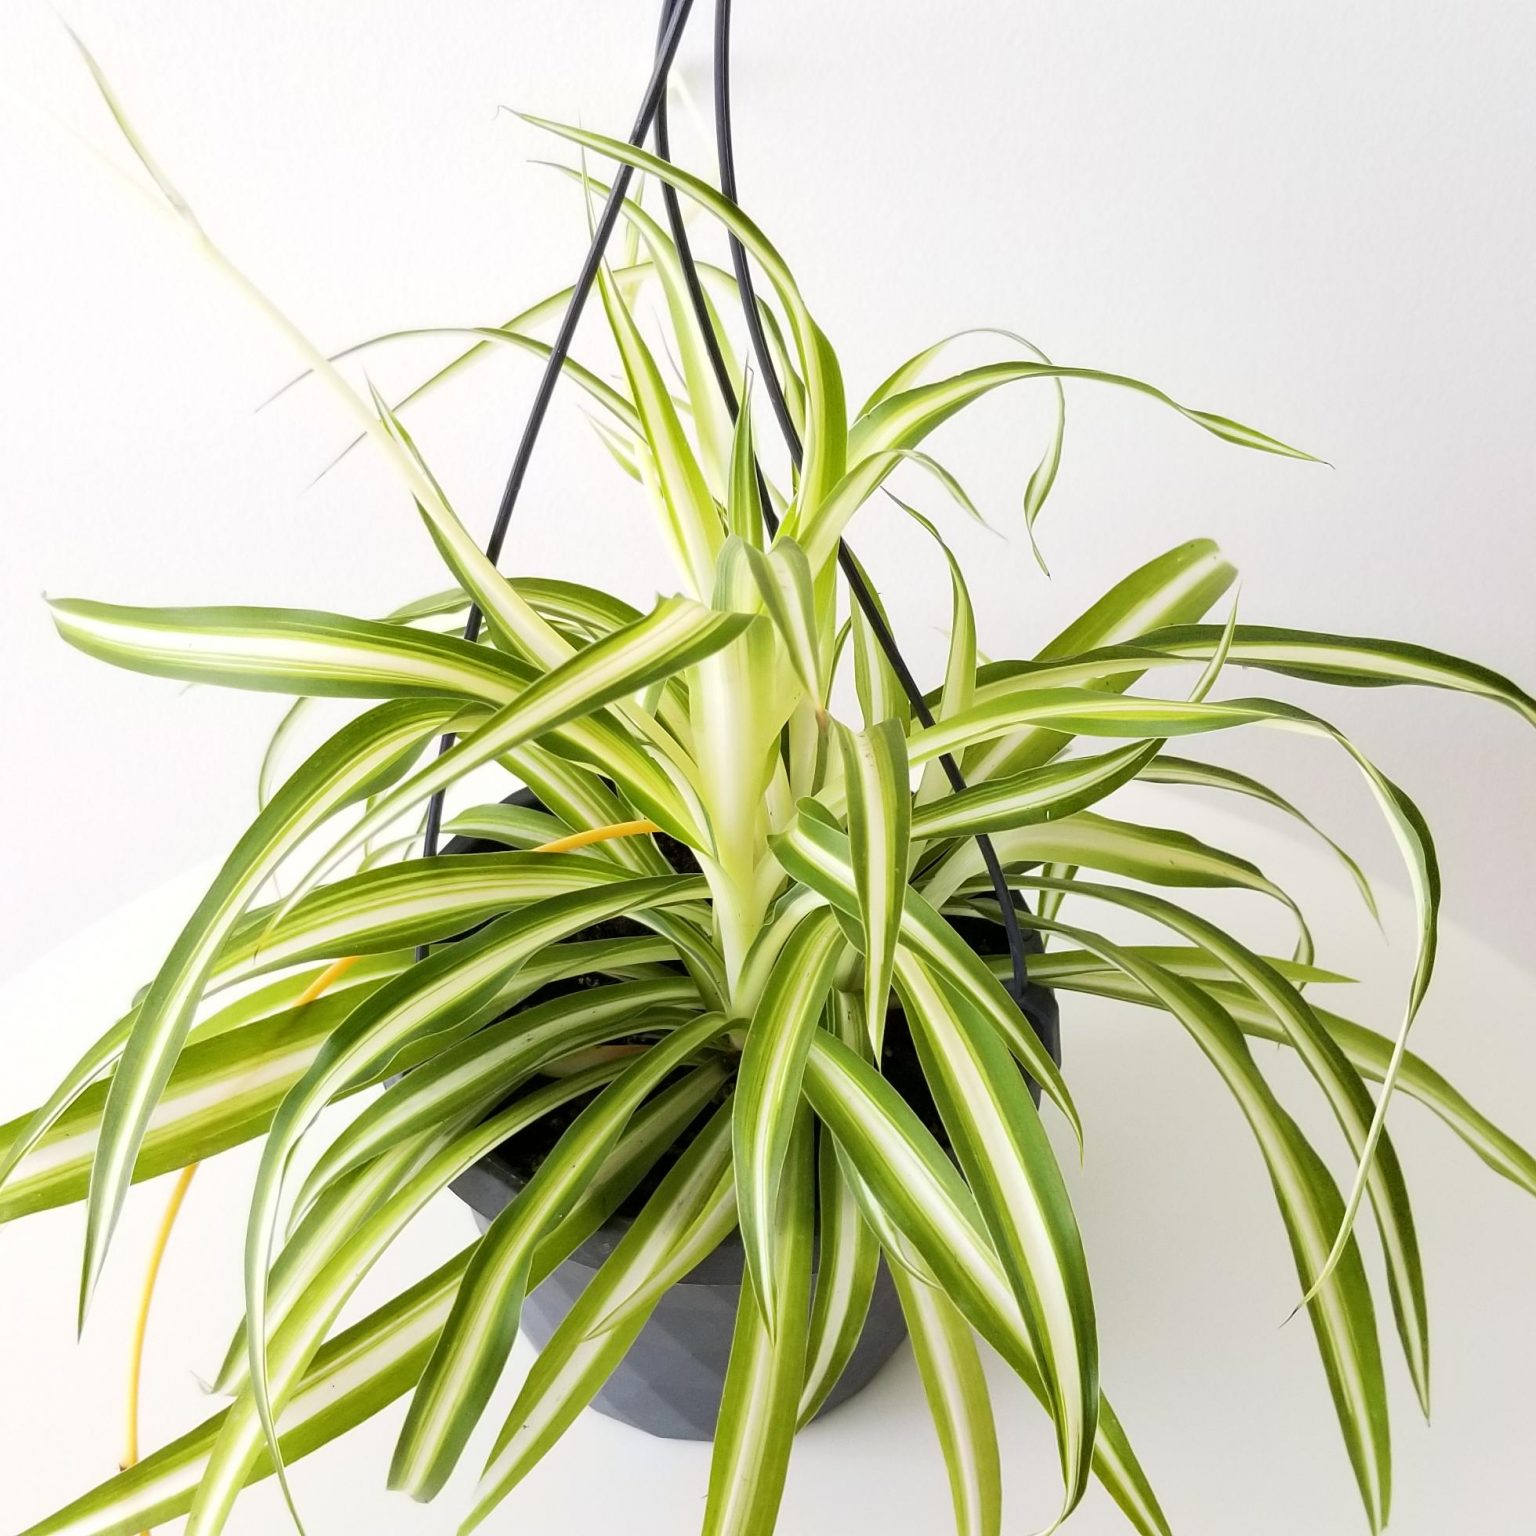 Albums 91+ Images show me a picture of a spider plant Stunning